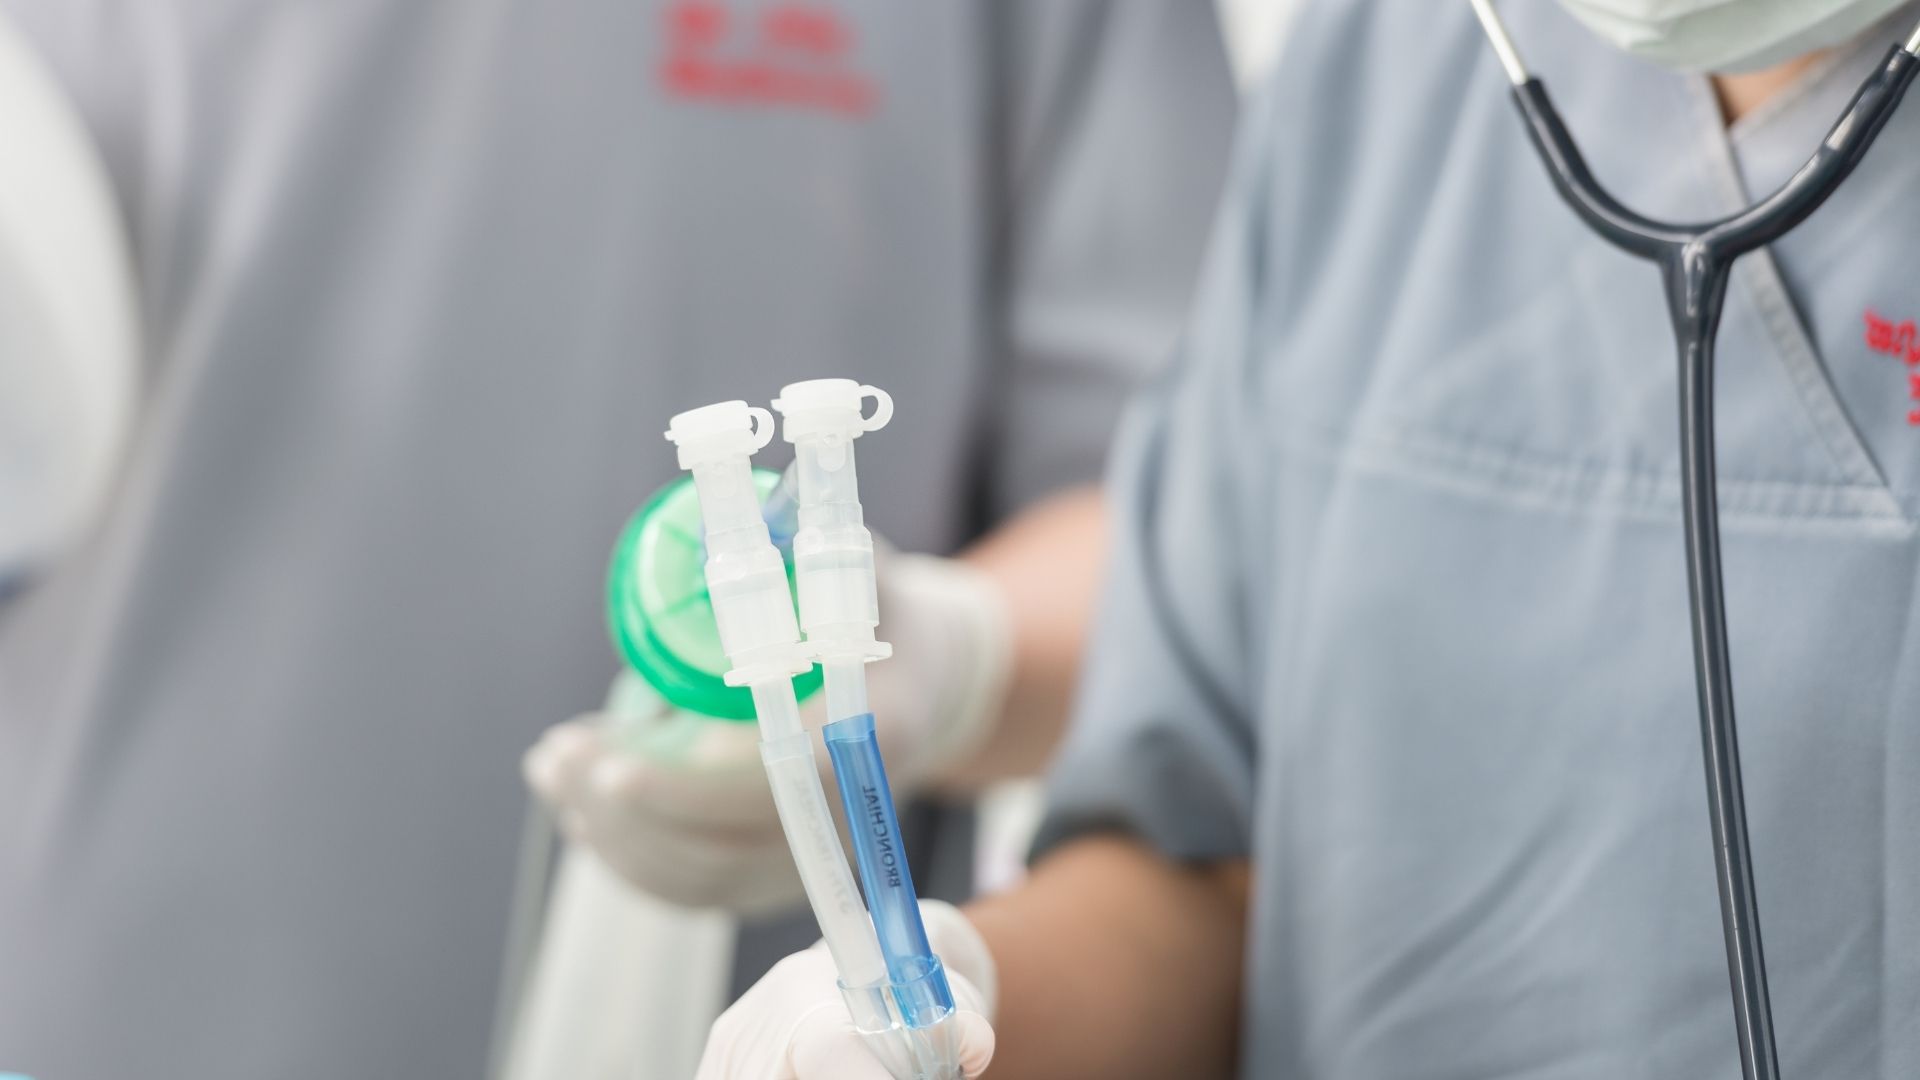 Top 3 Global Anesthesia Disposables Vendors in 2021